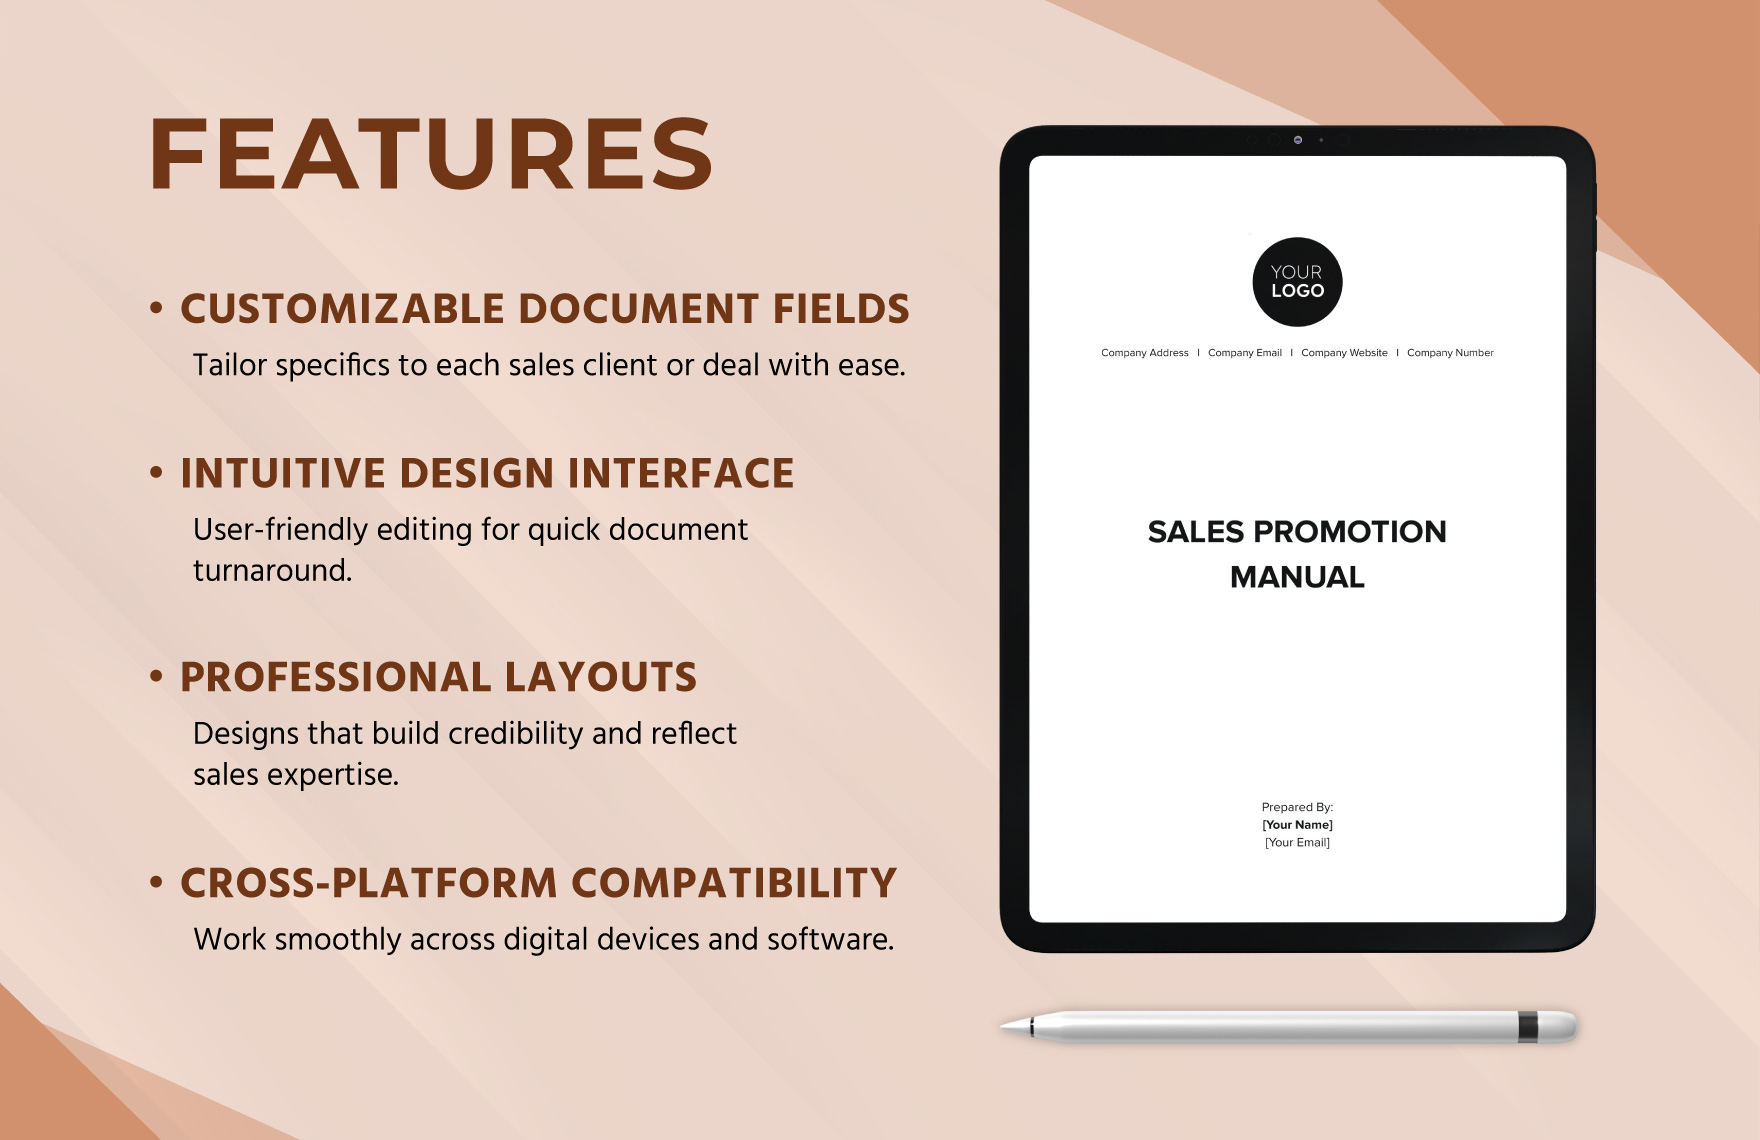 Sales Promotion Manual Template